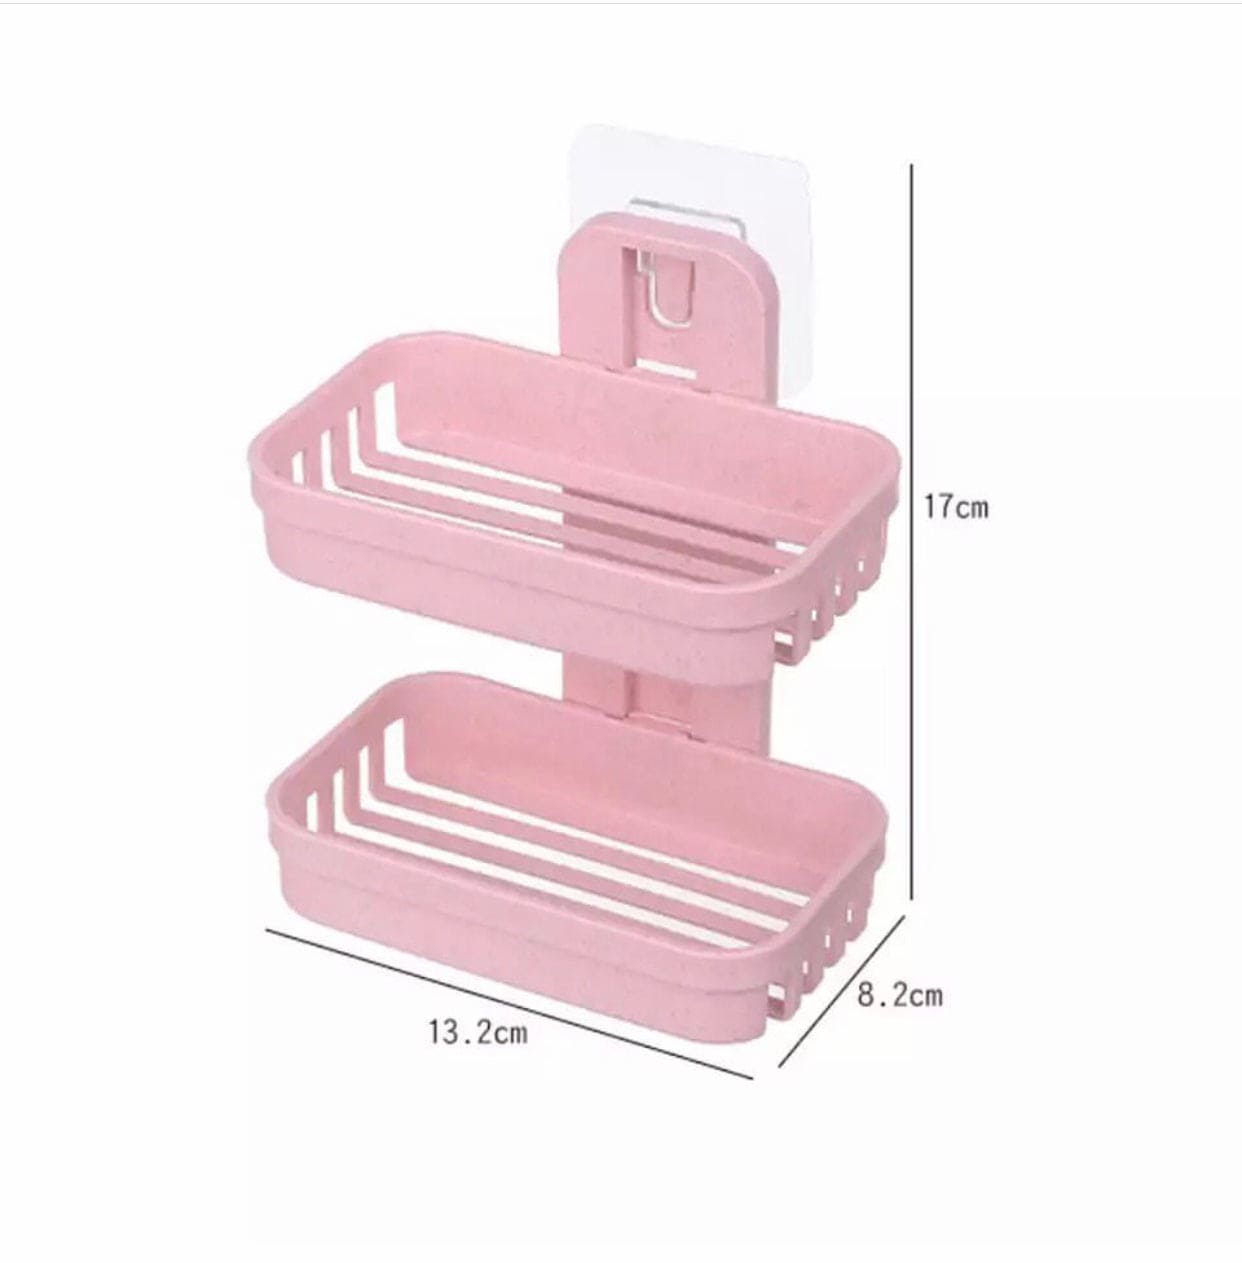 Punch Free Bathroom Suction Cup Double Shelf Soap Storage Rack, Wall Mounted Sponge Storage Rack, 2 Tier Soap And Sponge Holder With Drain